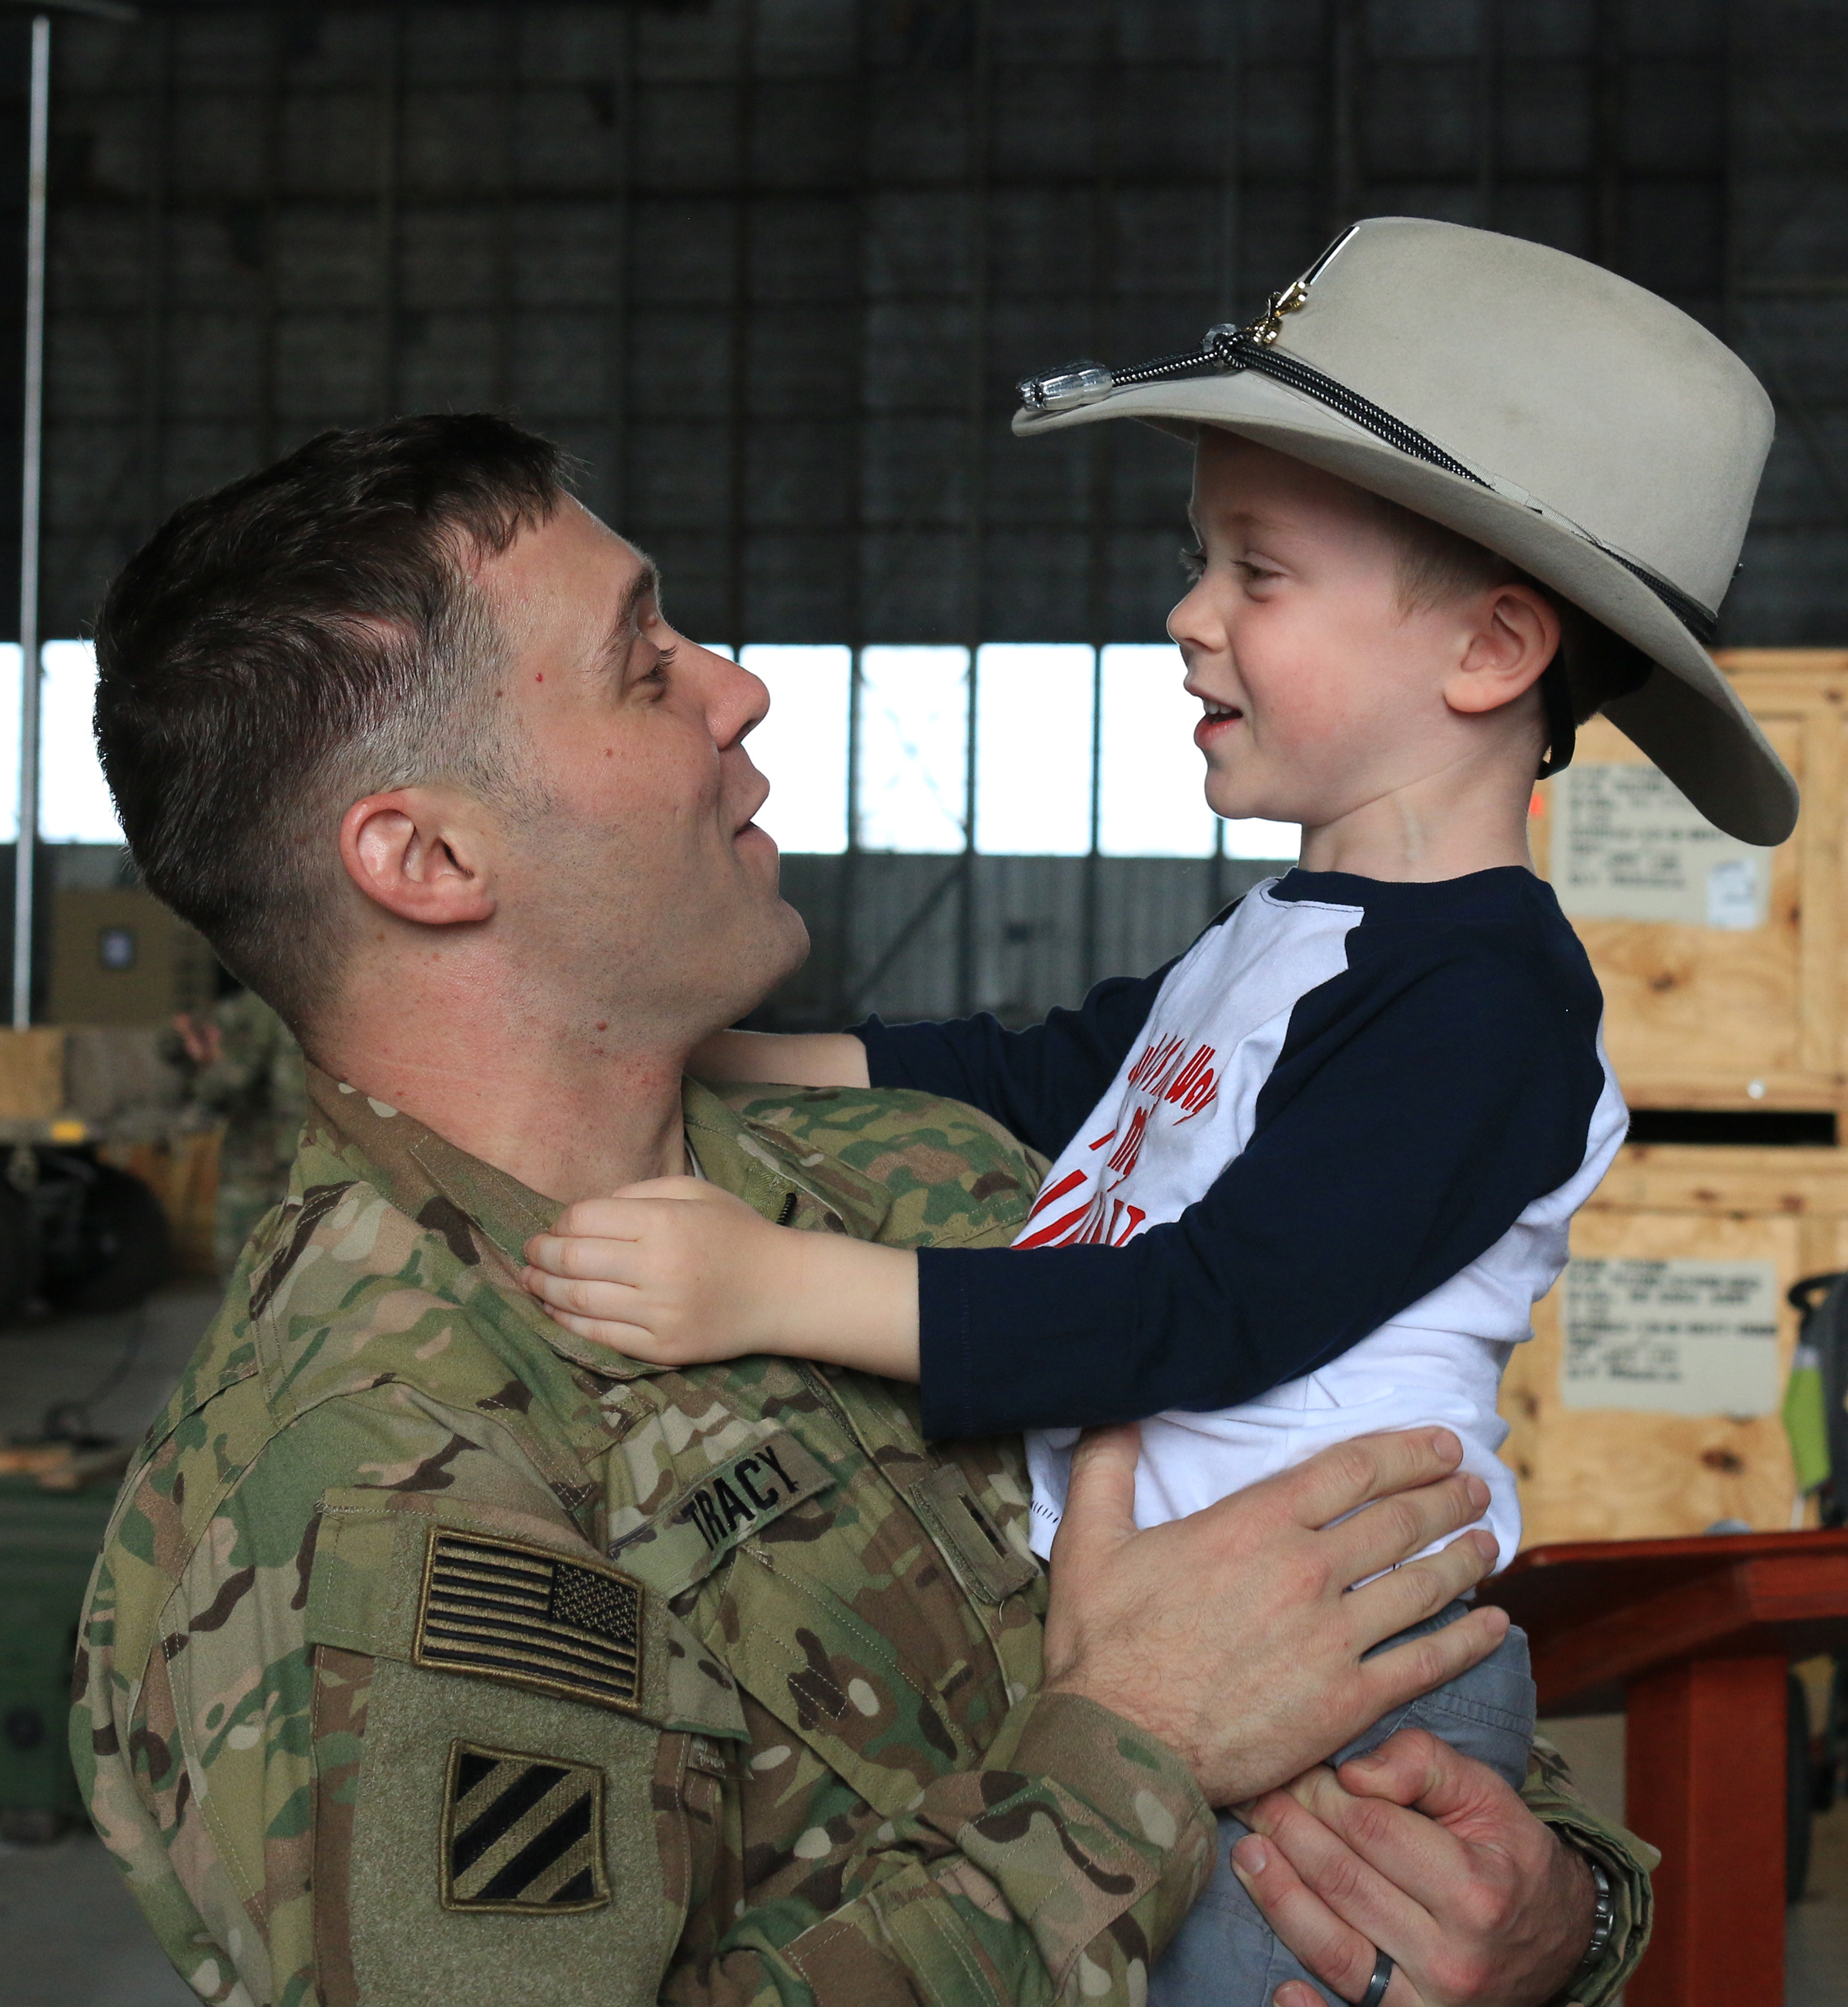  Chief Warrant Officer 2 Jon Tracy, hugs his 4-year-old son, Everett on Feb. 8, 2017, at Hunter Army Airfield after a 9-month deployment in Afghanistan. Tracy, a soldier in the 3rd Squadron, 17th Cavalry Regiment of the 3rd Infantry Division's 3rd Co